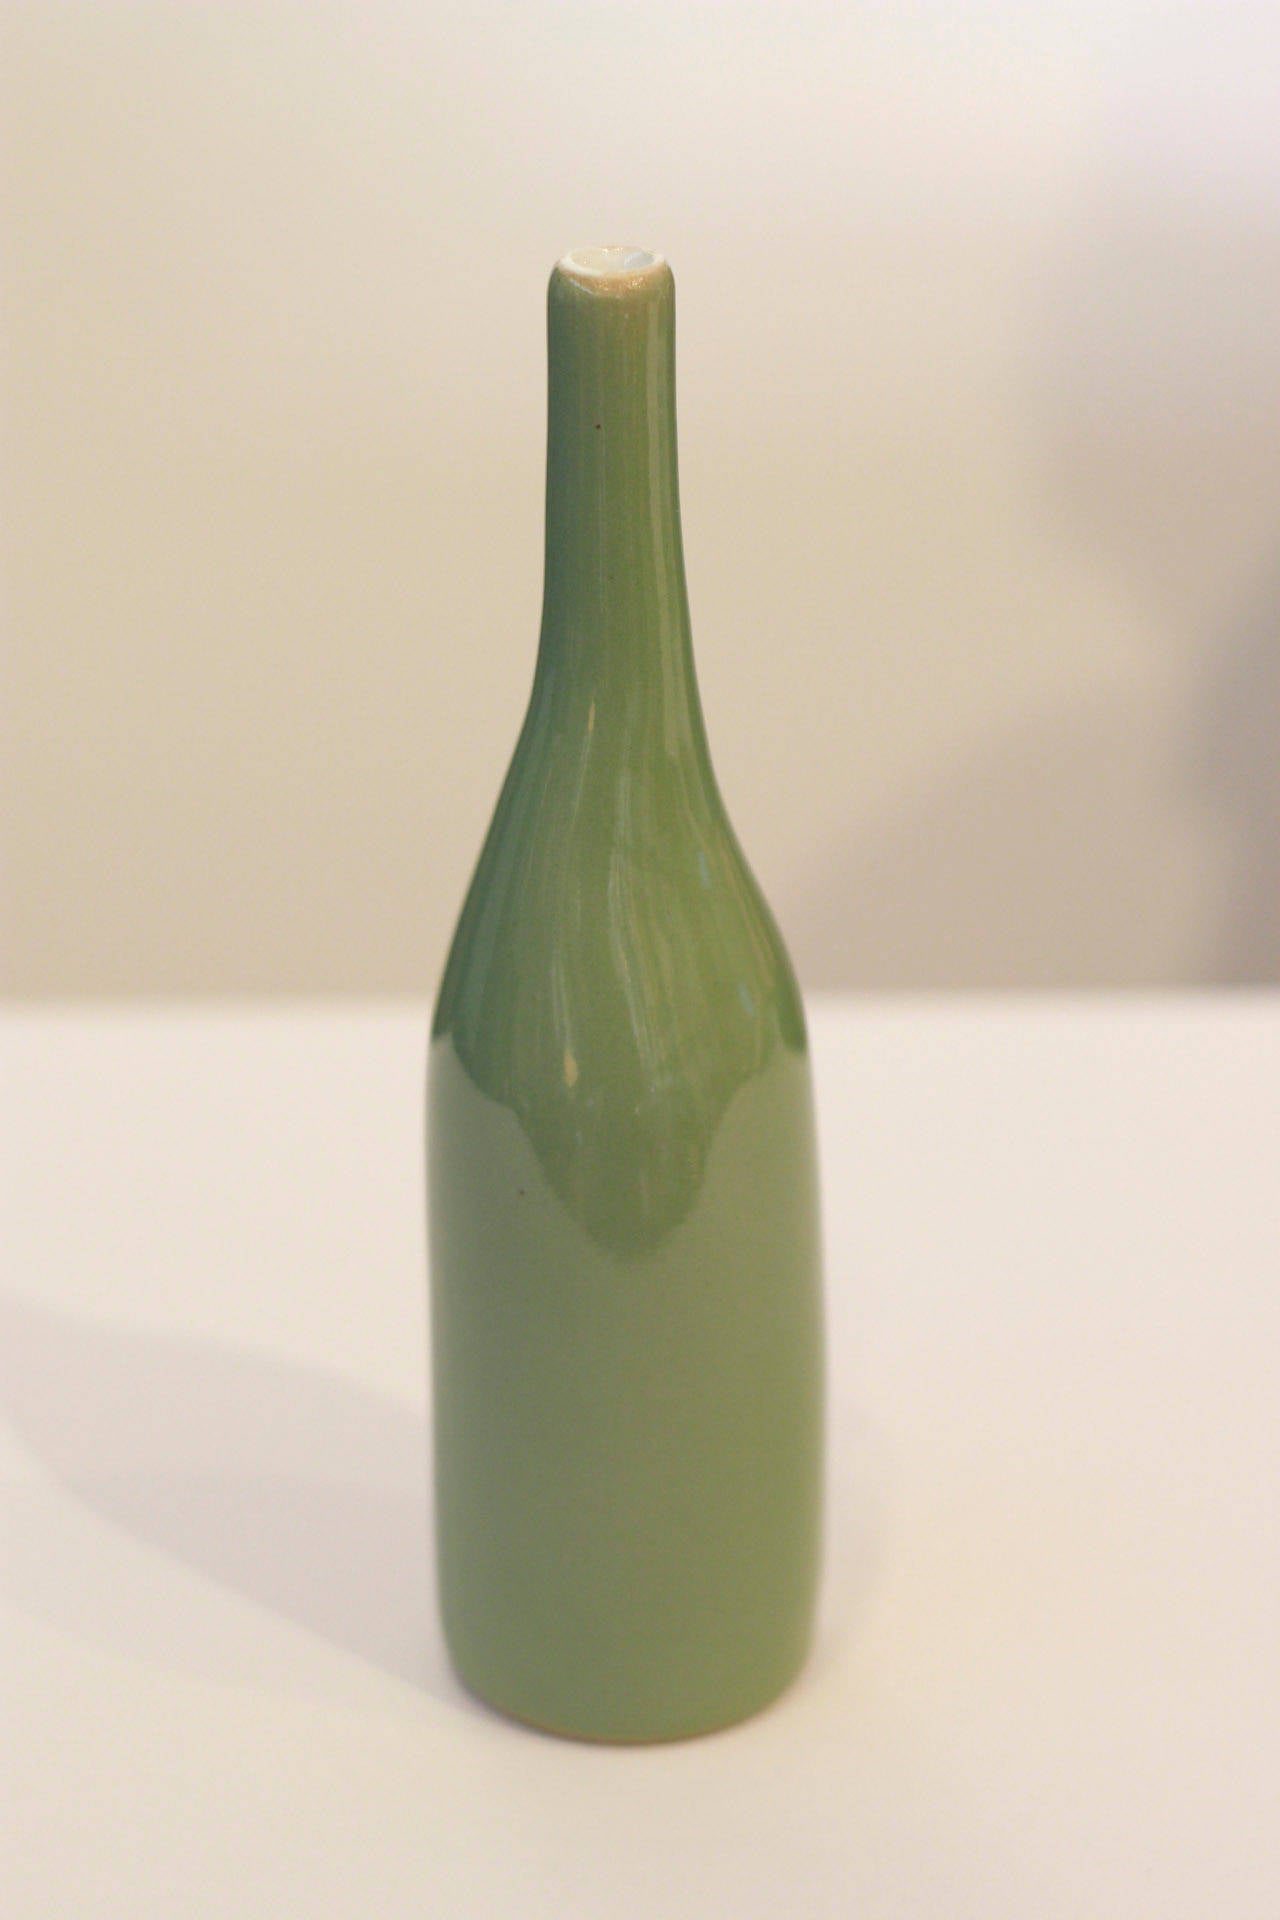 Ceramist Jonn Coolidge's green bottle is glazed enamel stoneware. 
Each piece is signed by the artist. Additional pieces of Jonn Coolidge ceramics available through S16 Home, please contact the dealer for more information.

Artist Bio: 
American